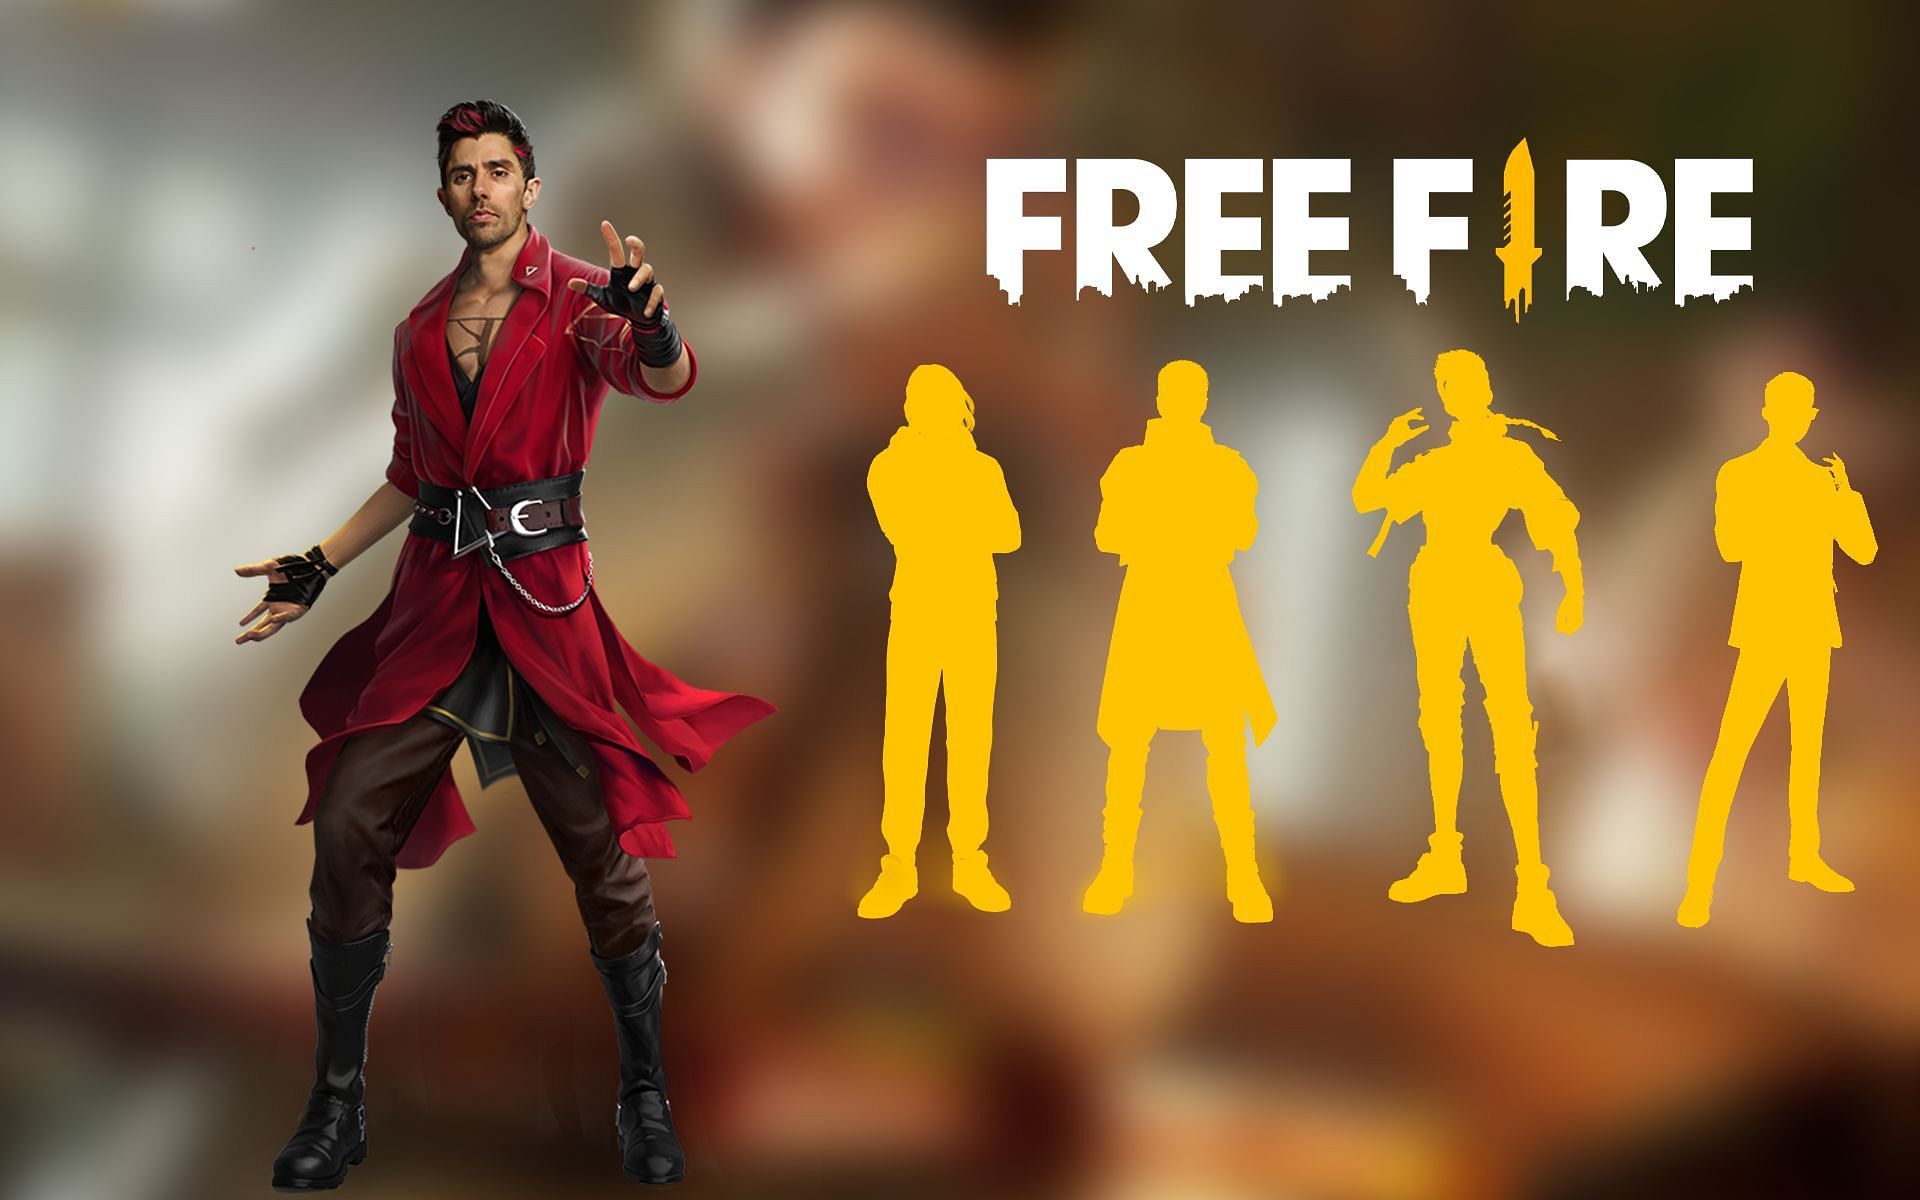 There are numerous characters with active abilities in Free Fire (Image via Sportskeeda)